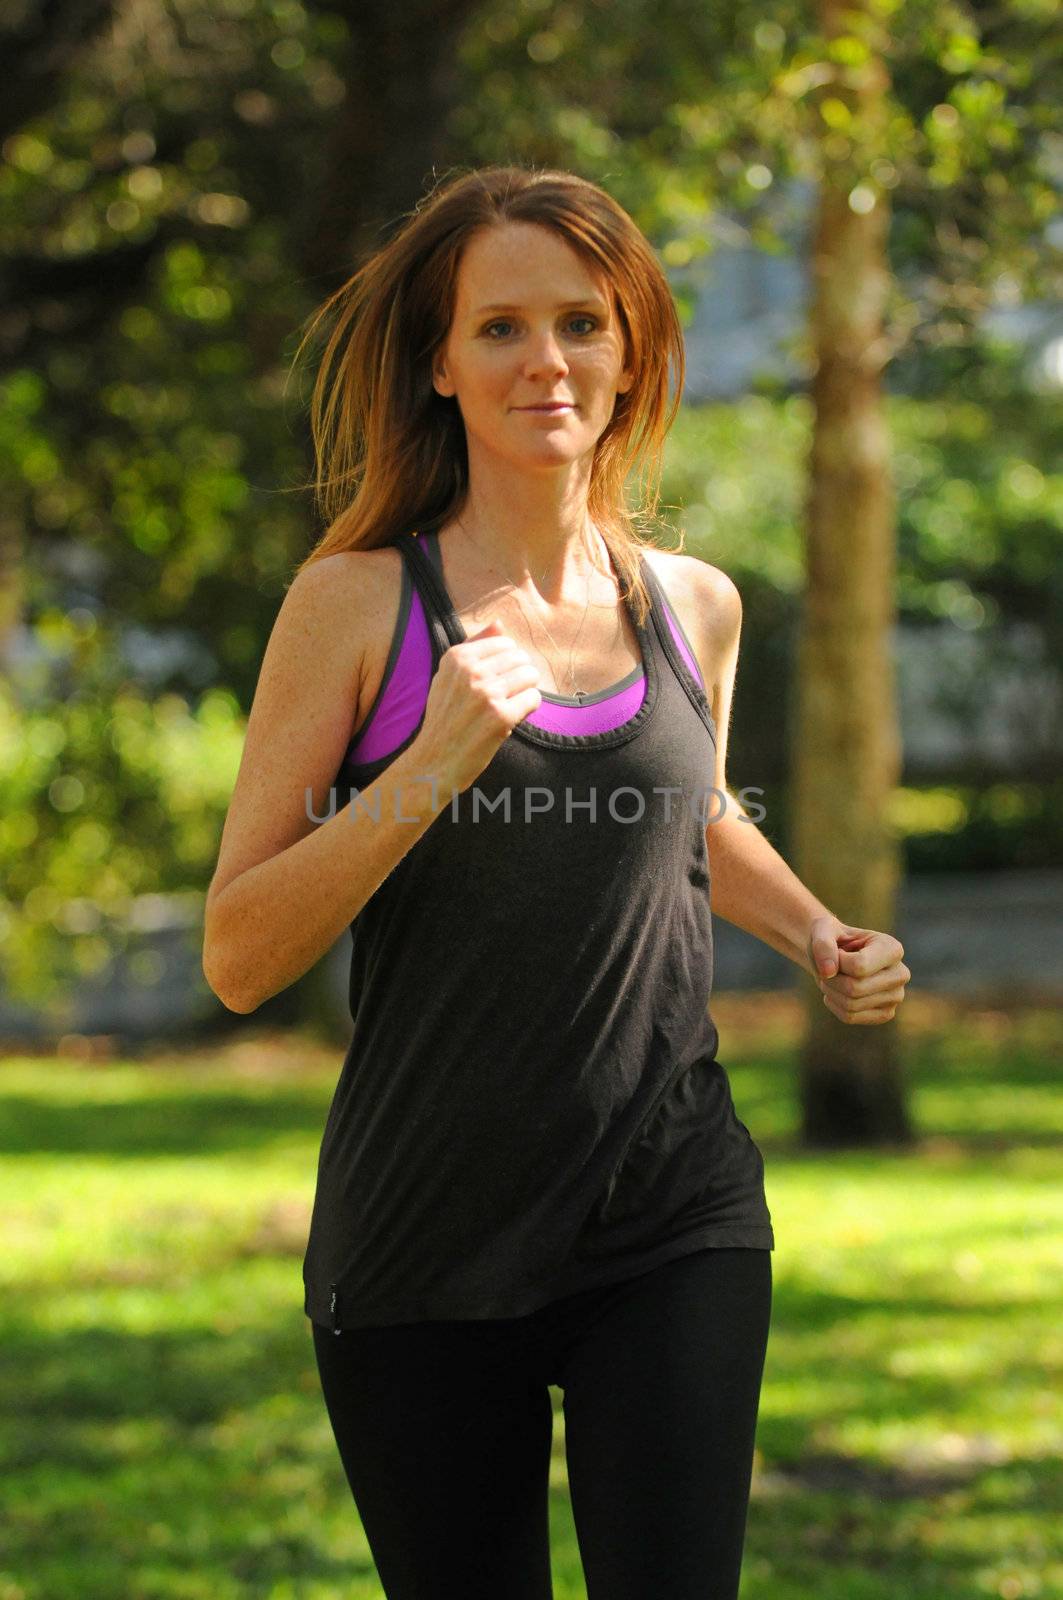 young woman getting in shape by running by ftlaudgirl